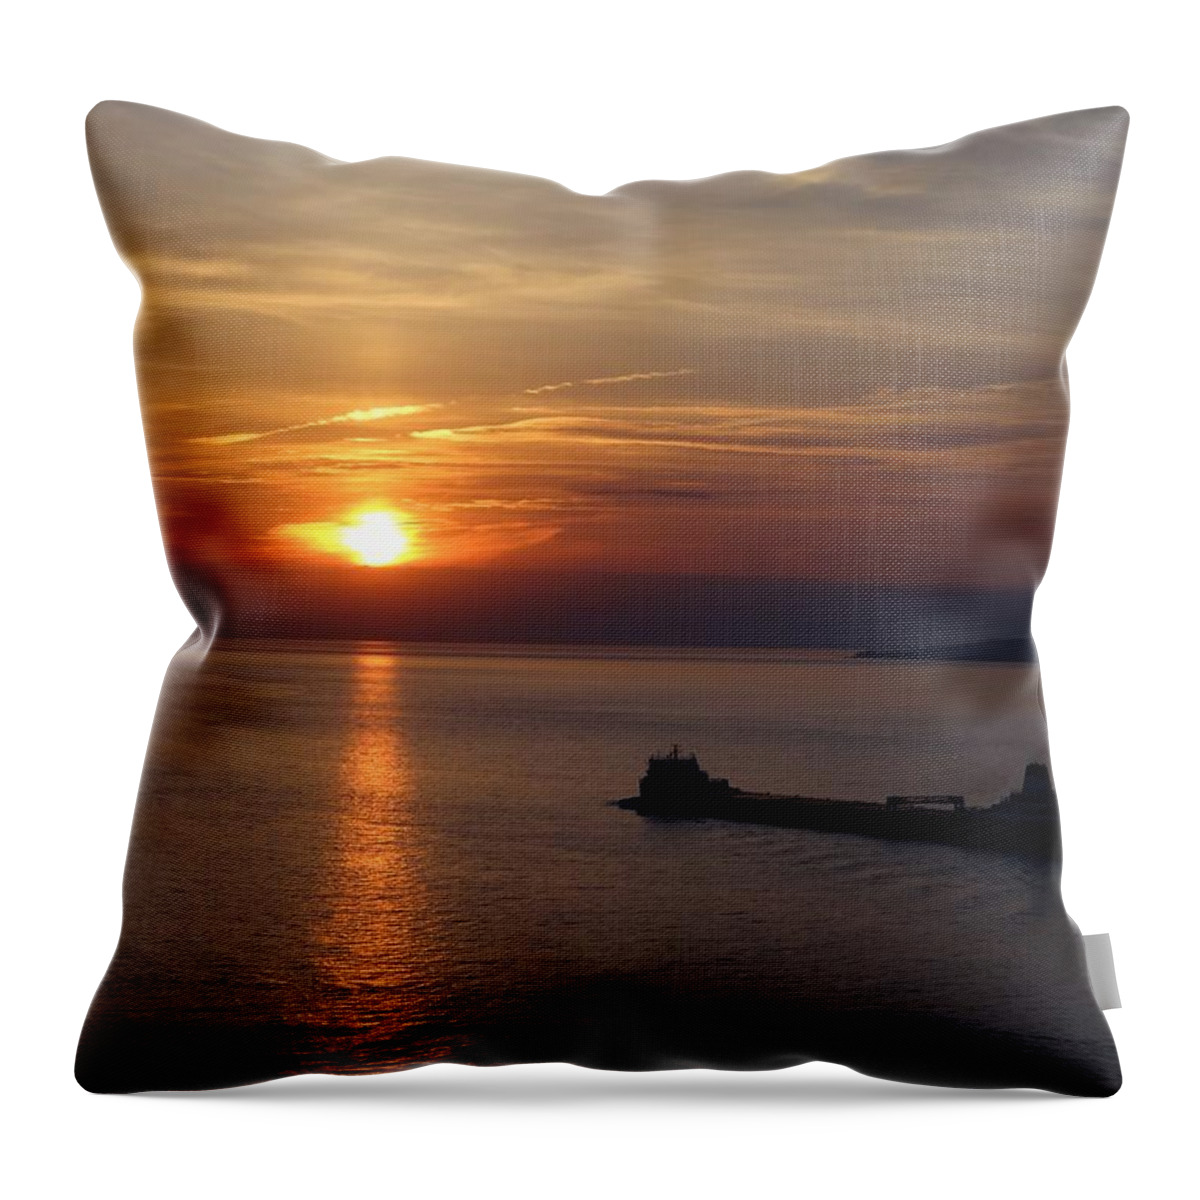 Boat Throw Pillow featuring the photograph Sailing Into the Sunset by Keith Stokes